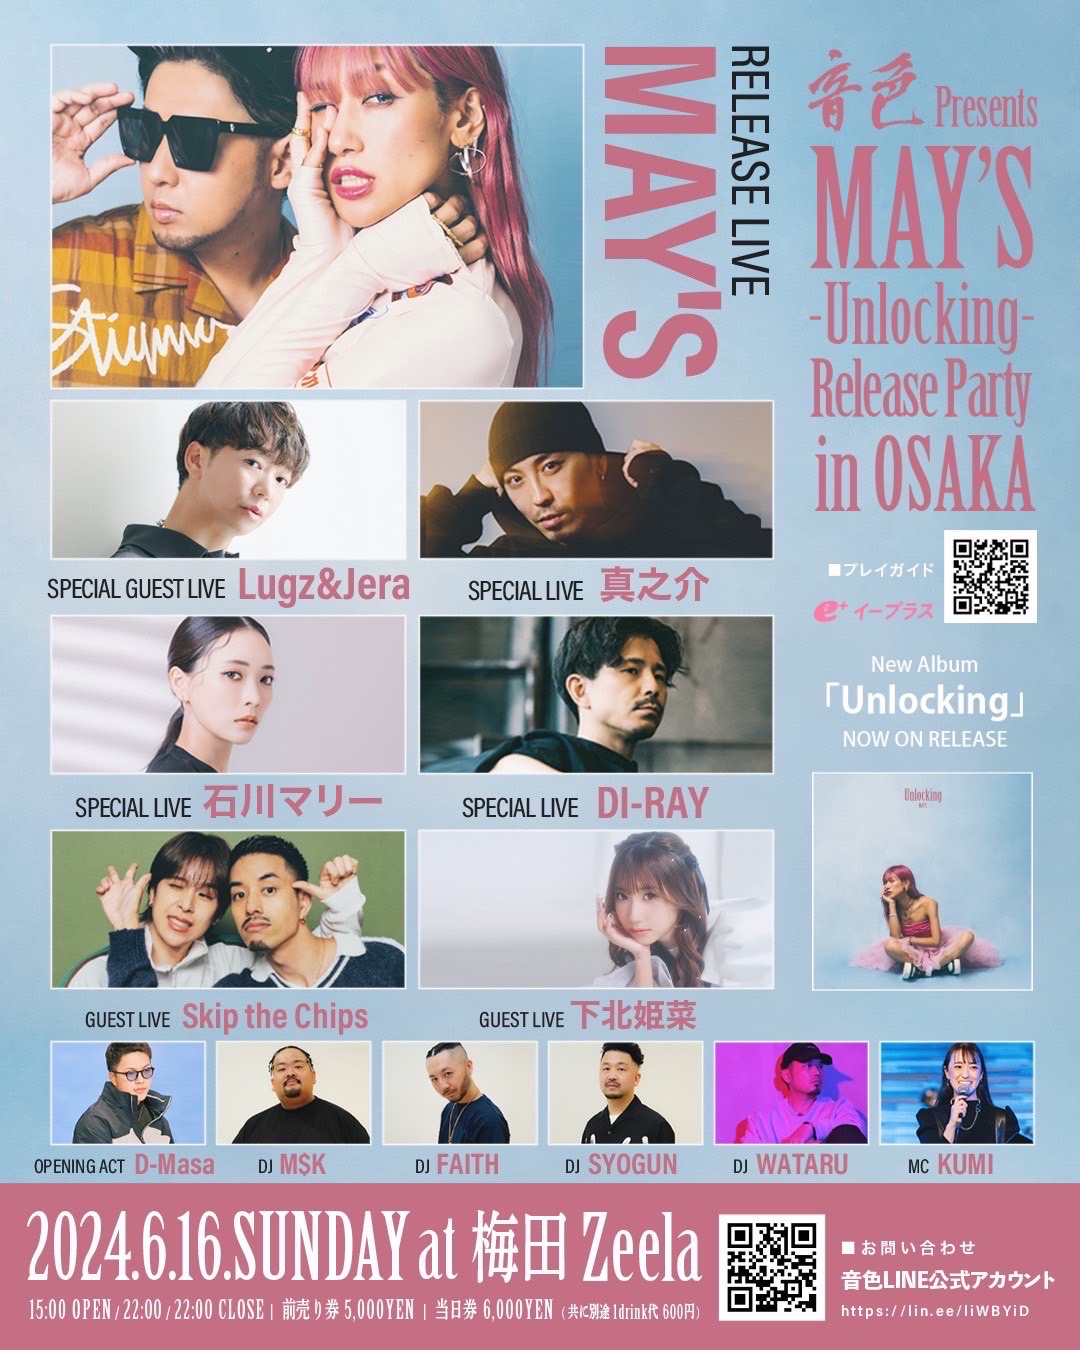 6.16(Sun) 音色Presents MAY'S “Unlocking” Release Party in OSAKA 